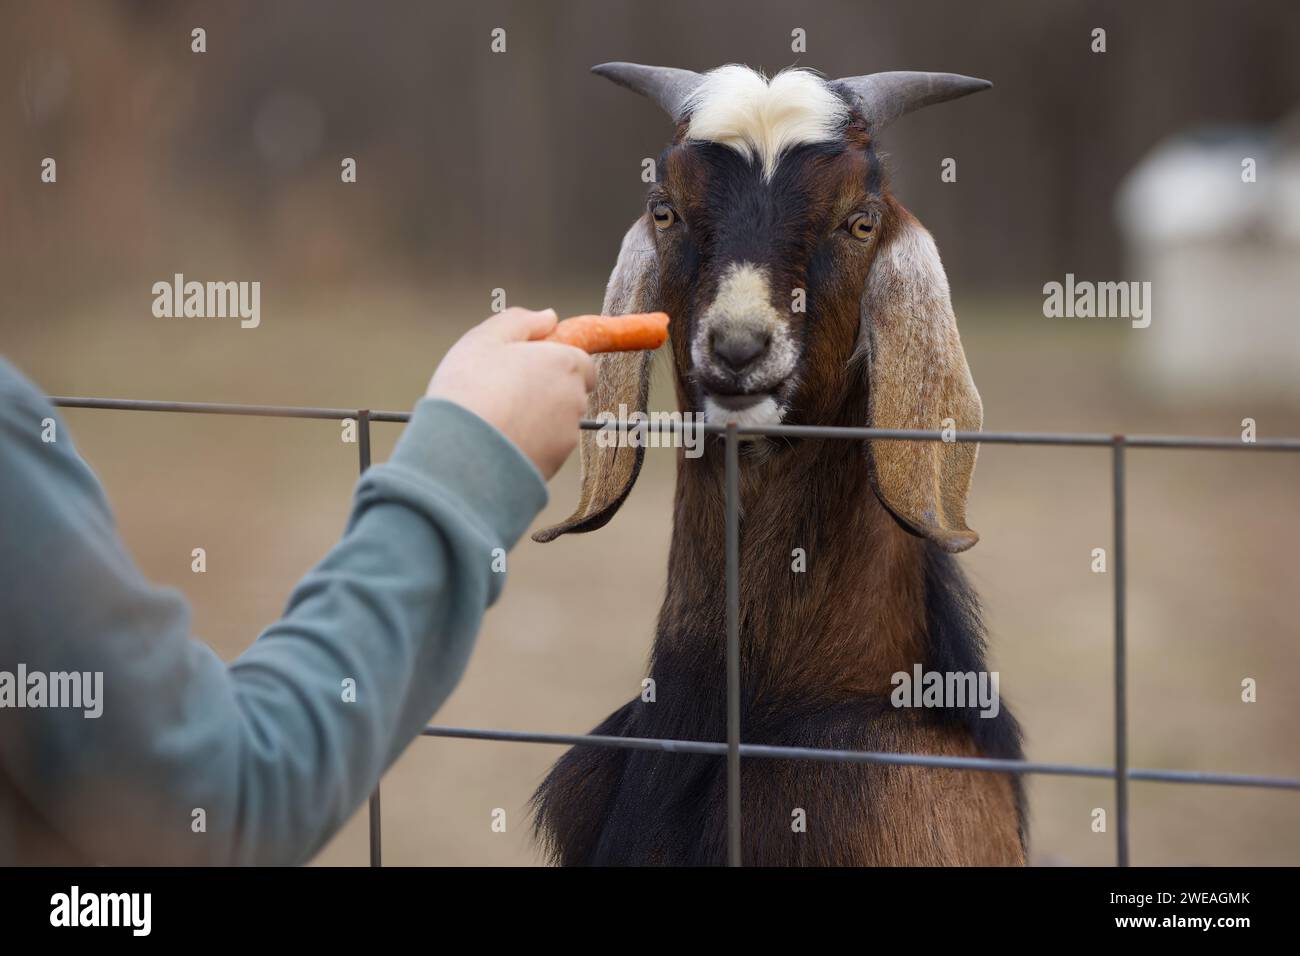 Goat eating from a persons hand Stock Photo